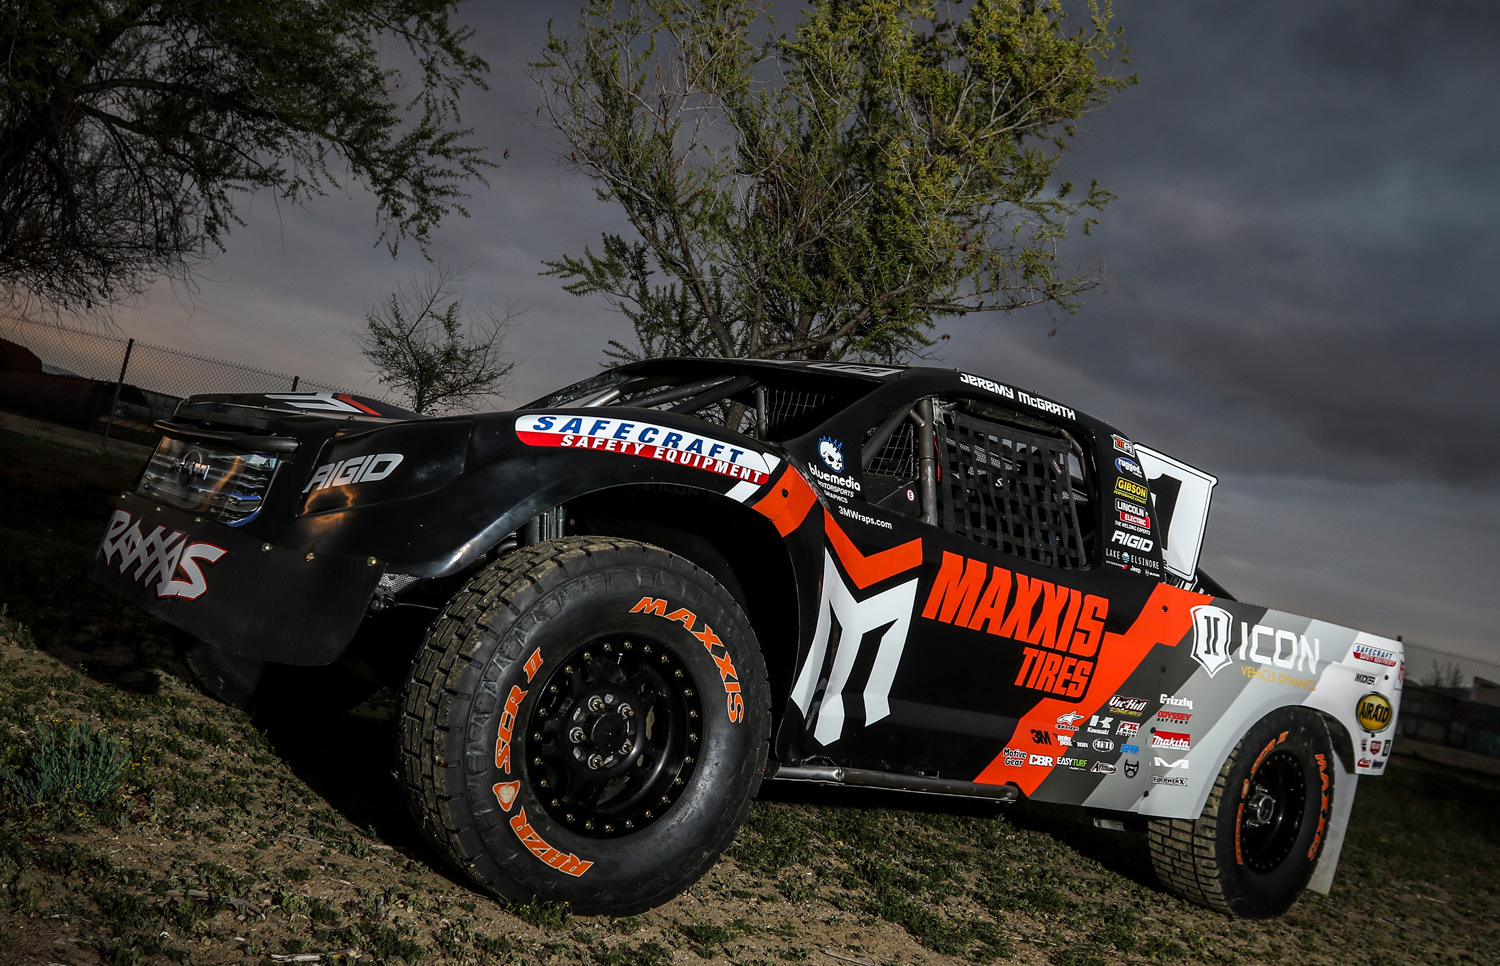 Mcgrath, Heger Charge into 2018 as Maxxis Title-Sponsored Competitors